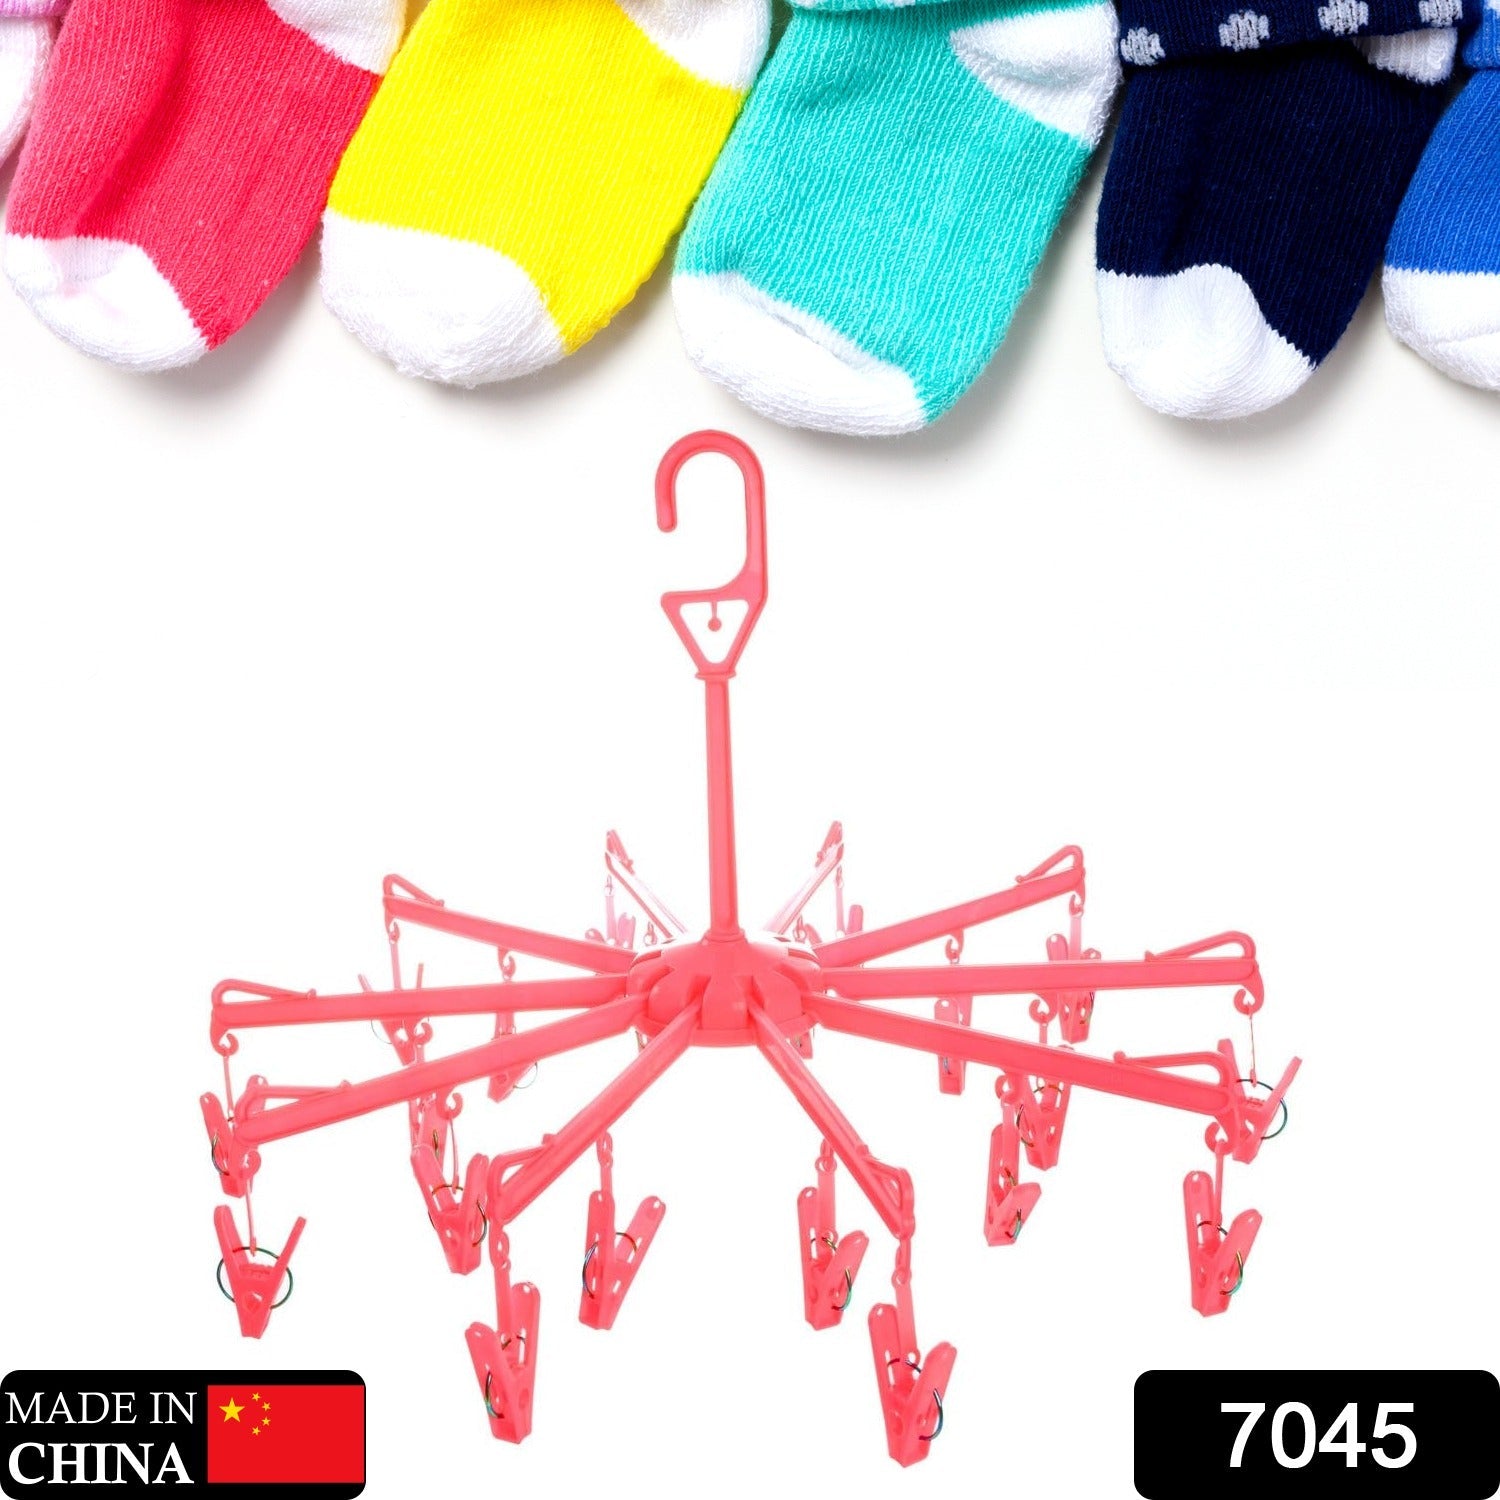 7045 Plastic Foldable Underwear Hanging Dryer Clothes Clips Hanger Drying Rack, Clothes Hangers with 16 Clips, Clip Hanger Drip Hanger for Drying Underwear, Baby Clothes, Socks, Bras, Towel, Cloth Diapers, Gloves